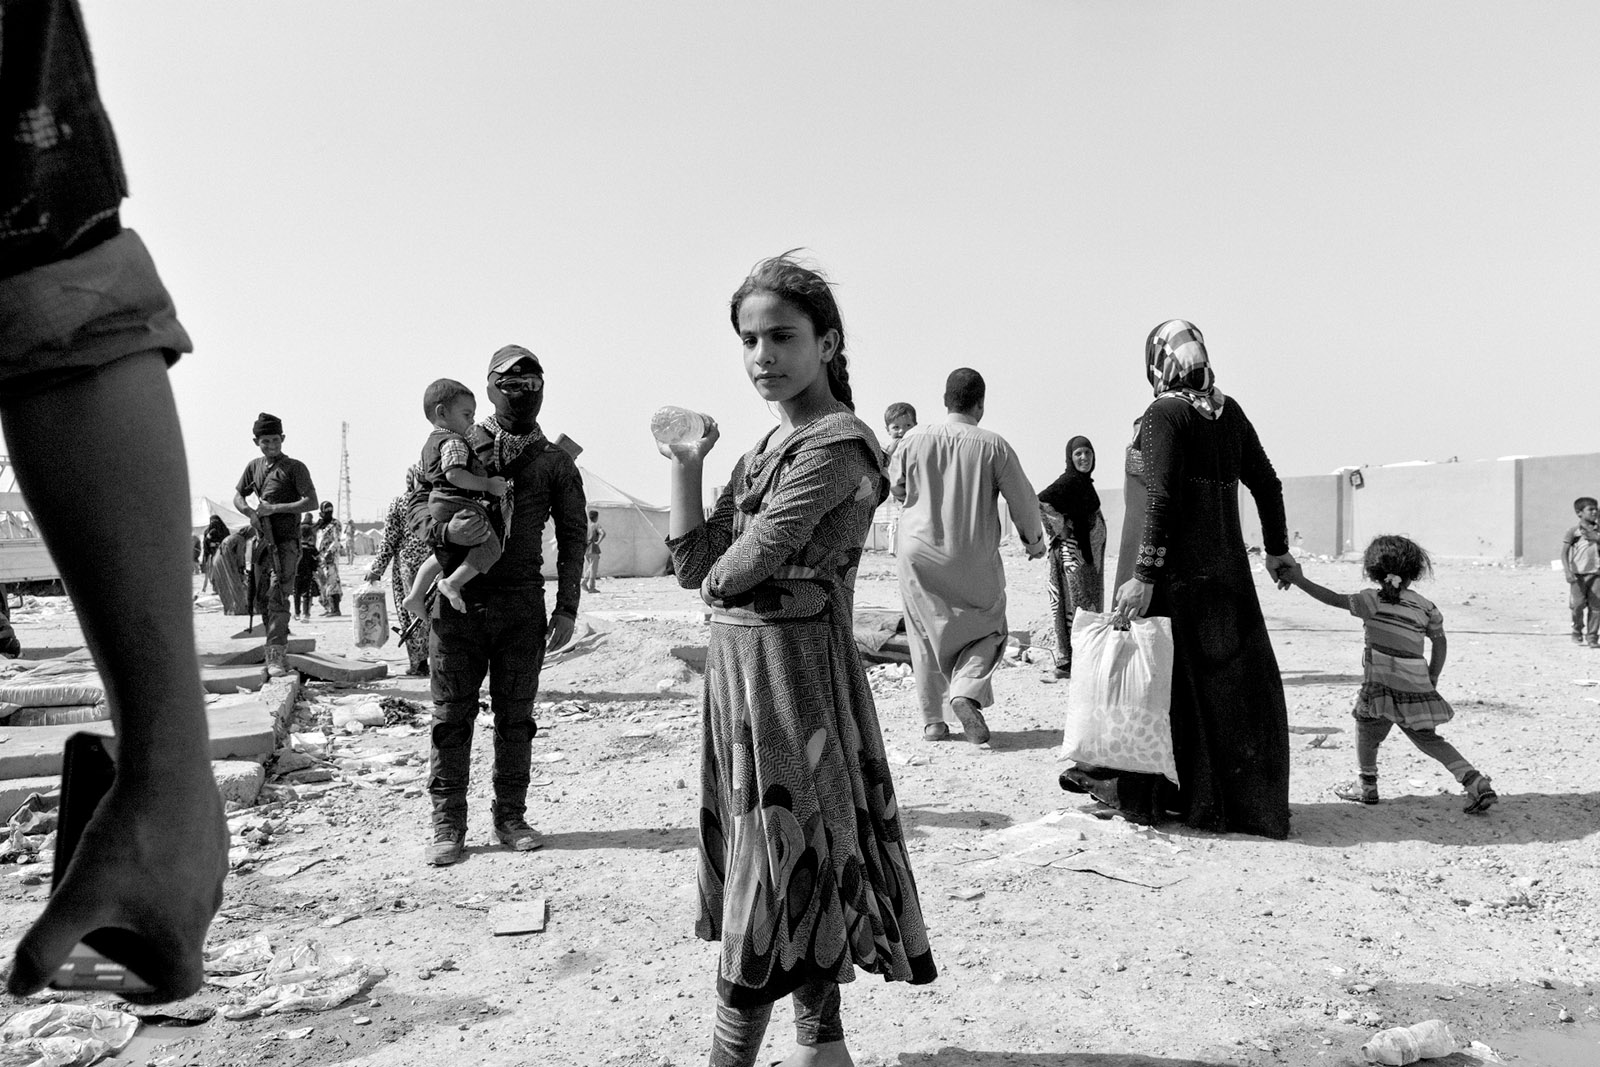 Iraqi civilians fleeing from the ISIS-controlled towns of Shirqat and Gwer, which Iraqi and Kurdish forces were attempting to recapture as part of the Mosul offensive, July 2016